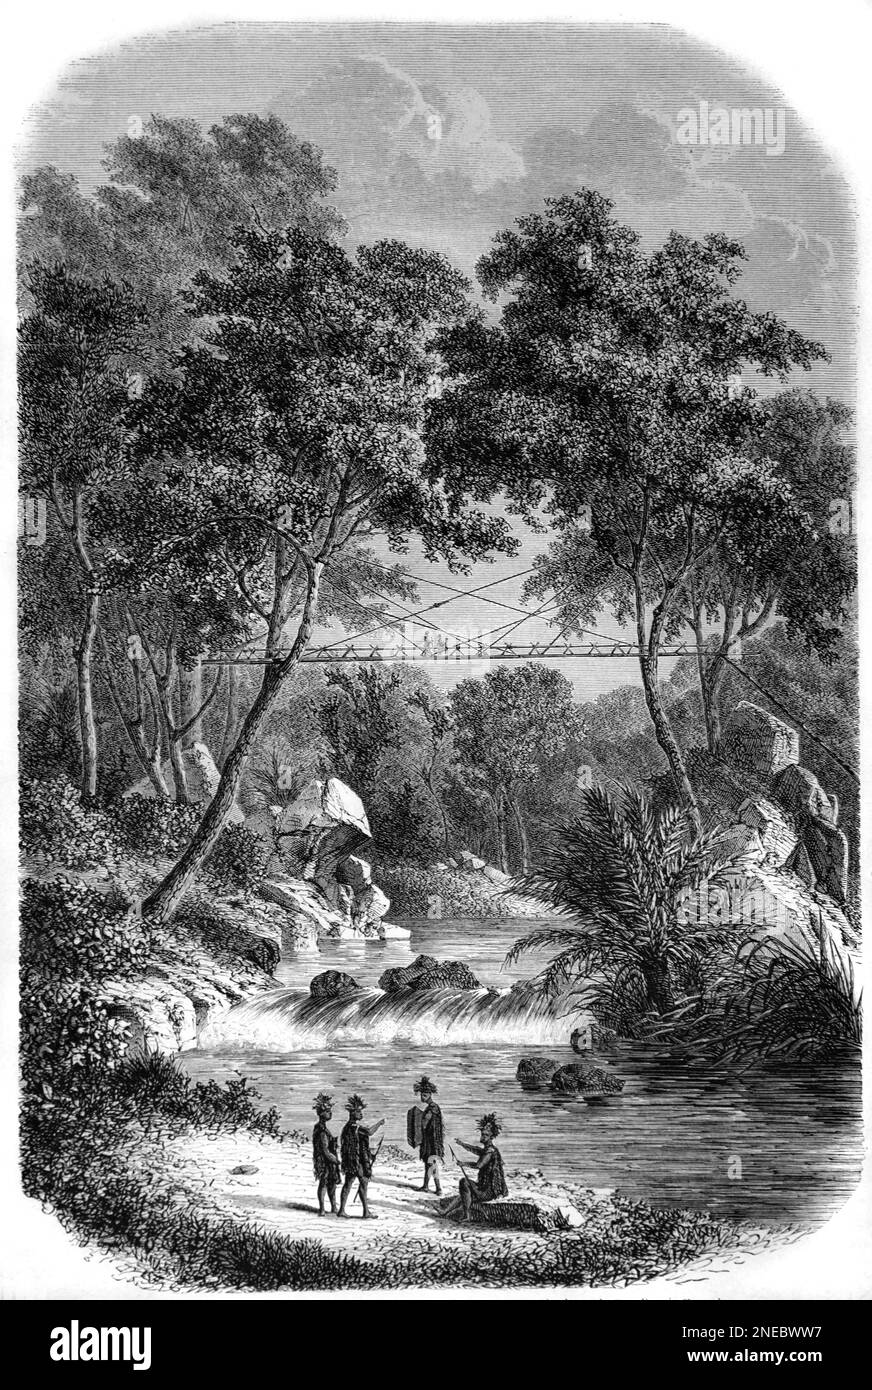 Dayak Bamboo Footbridge Crossing a River in the Rainforest or Borneo. Vintage Engraving or Illustration 1862 Stock Photo